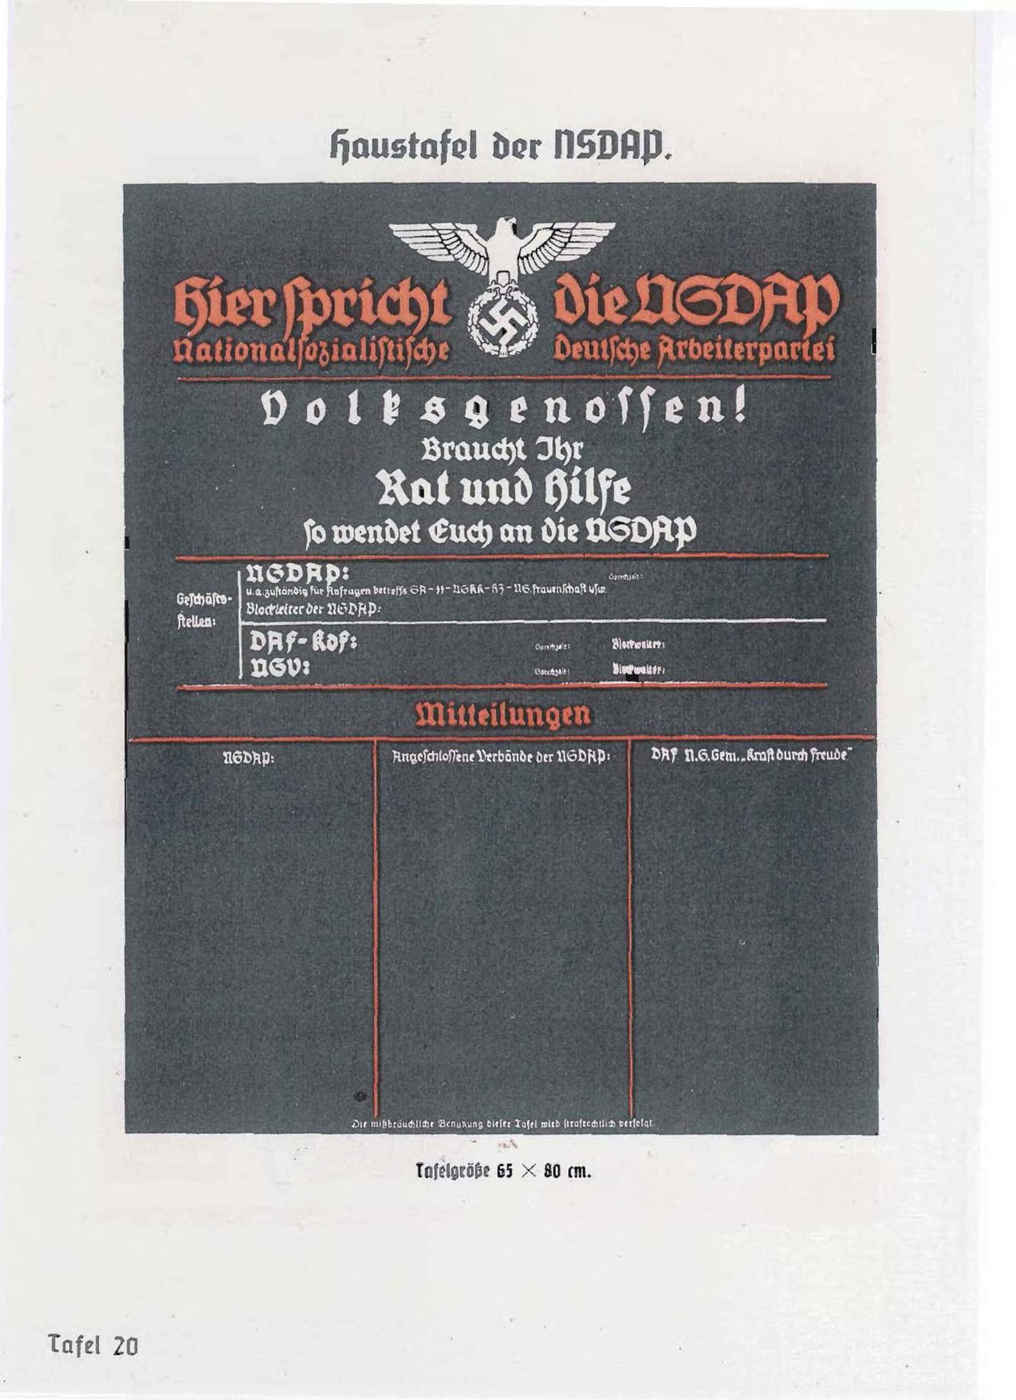 An unfortunately-faded Nazi form using rubrication to maintain legibility of blackletter text on a black background; pg99 of the 1937 Organisationsbuch der NSDAP yearbook, ed Robert Ley